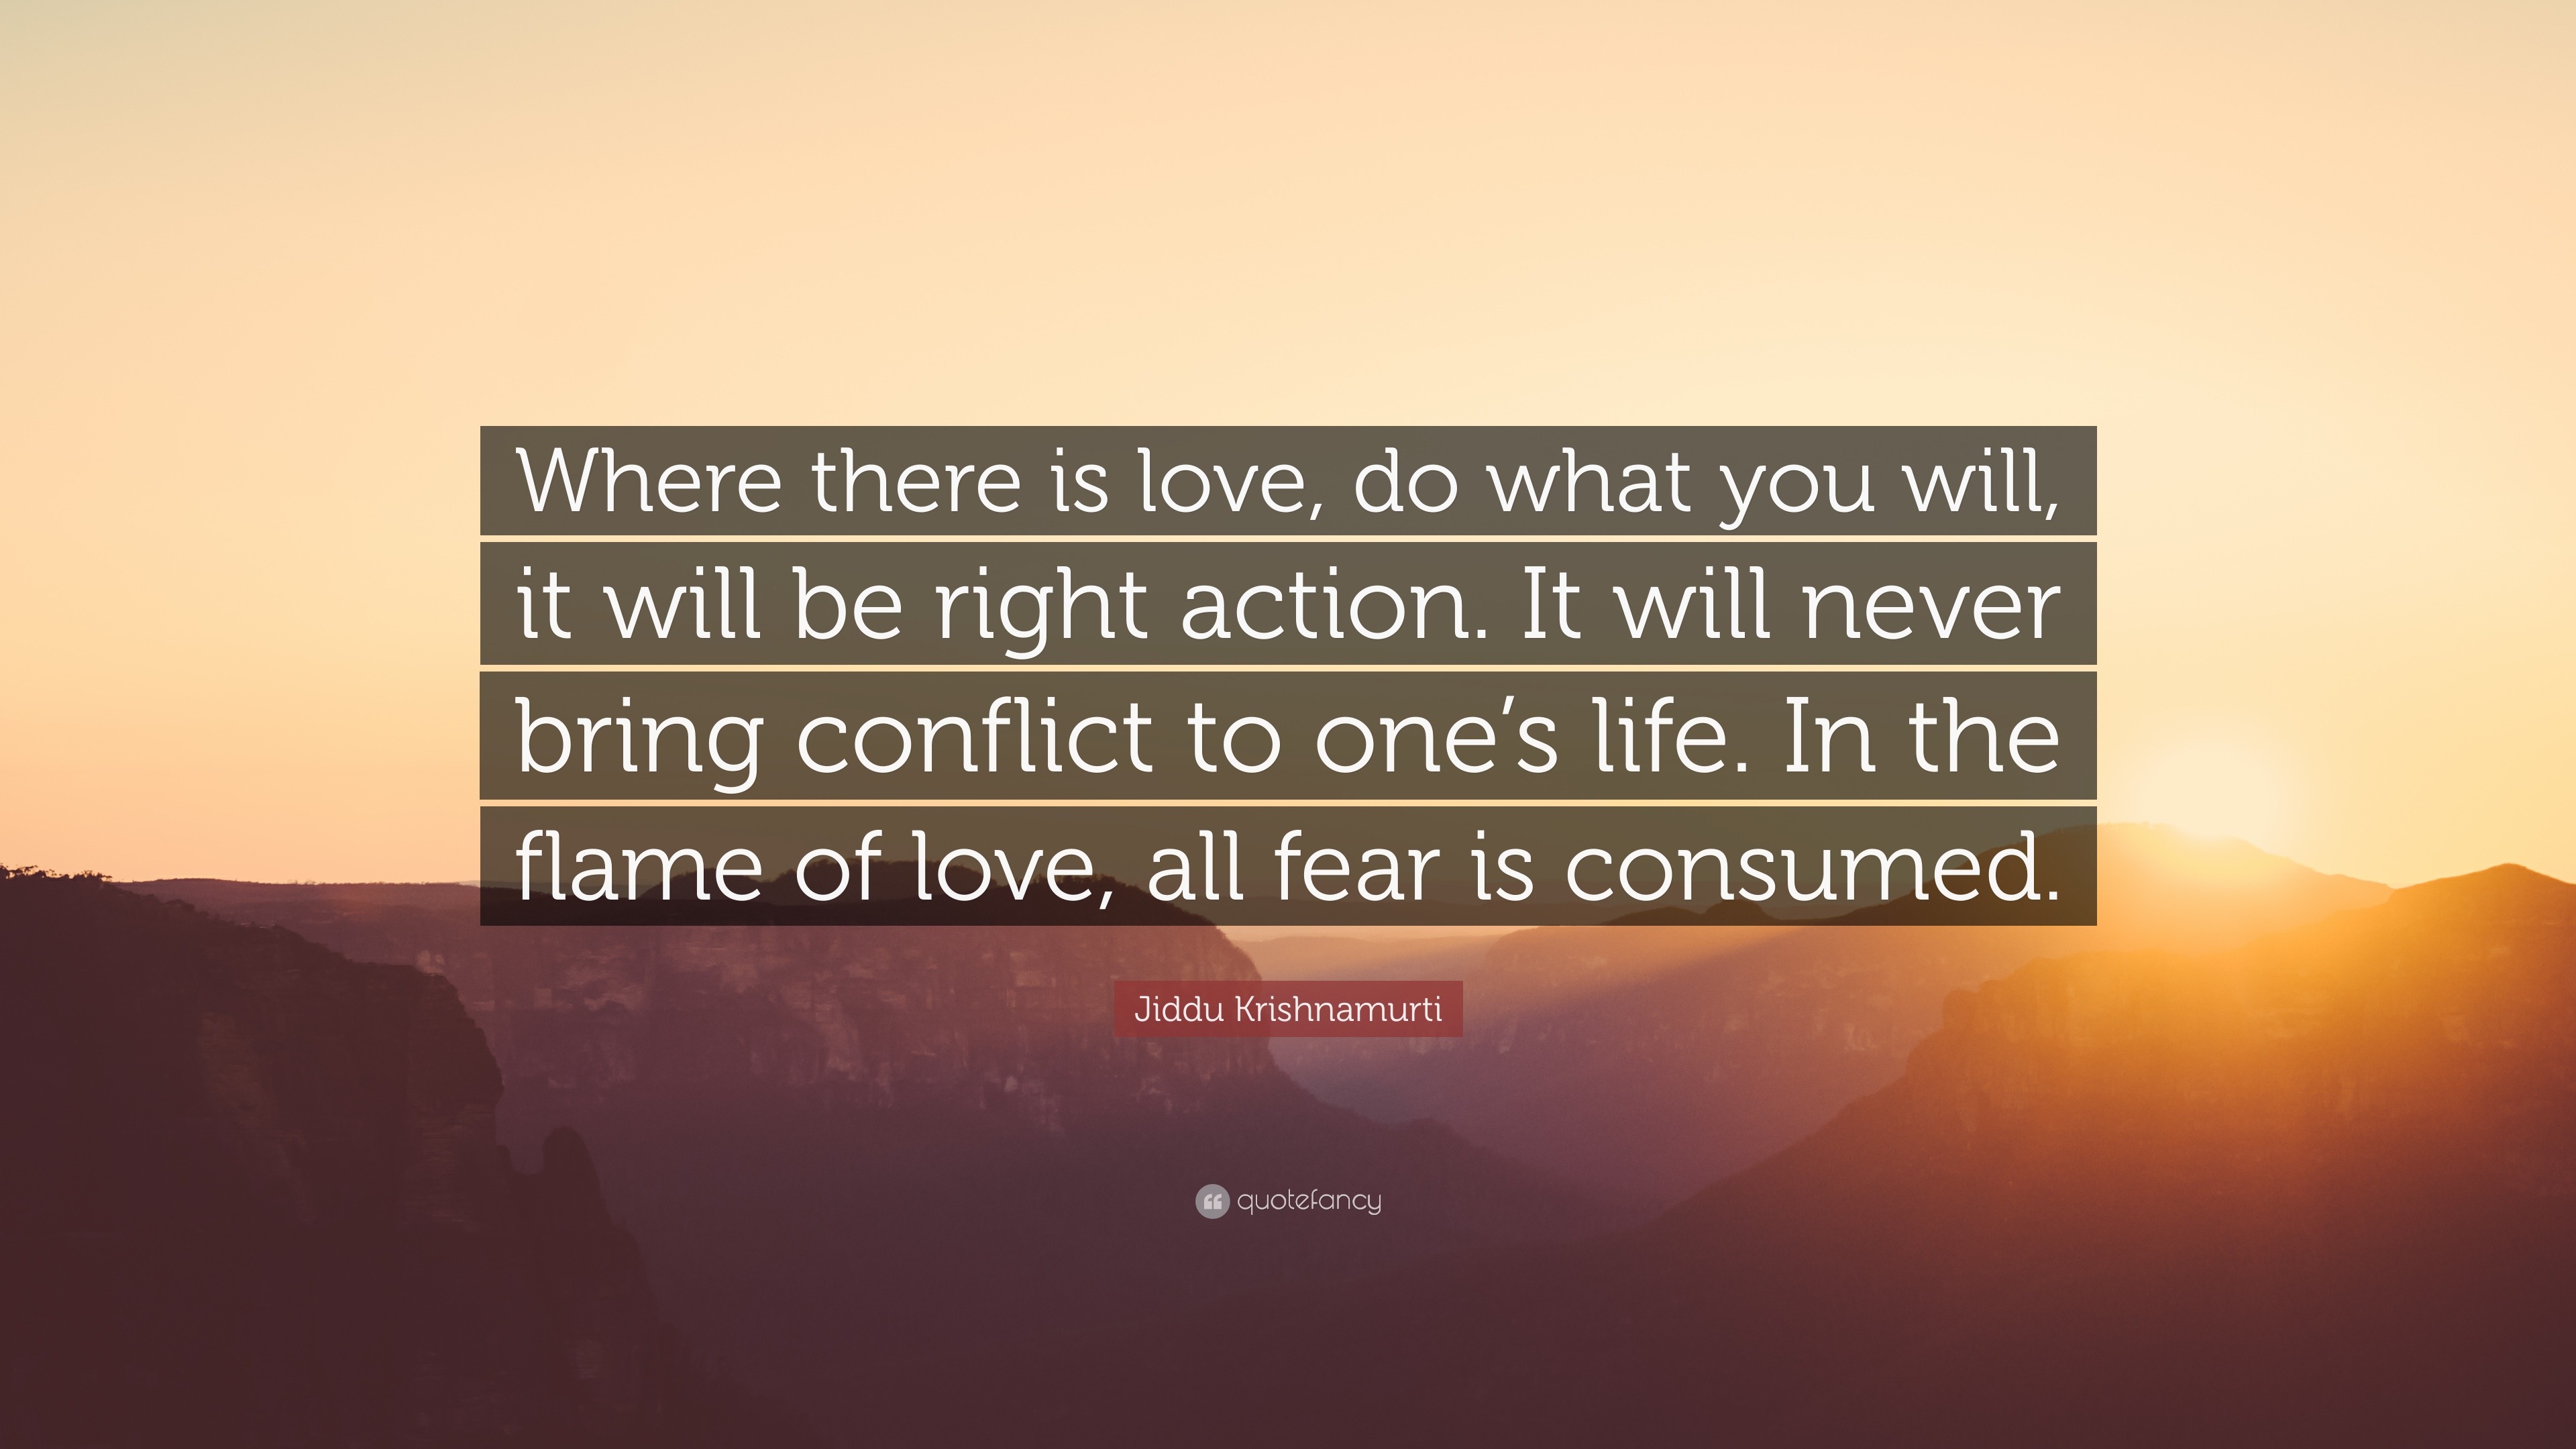 Jiddu Krishnamurti Quote “Where there is love do what you will it